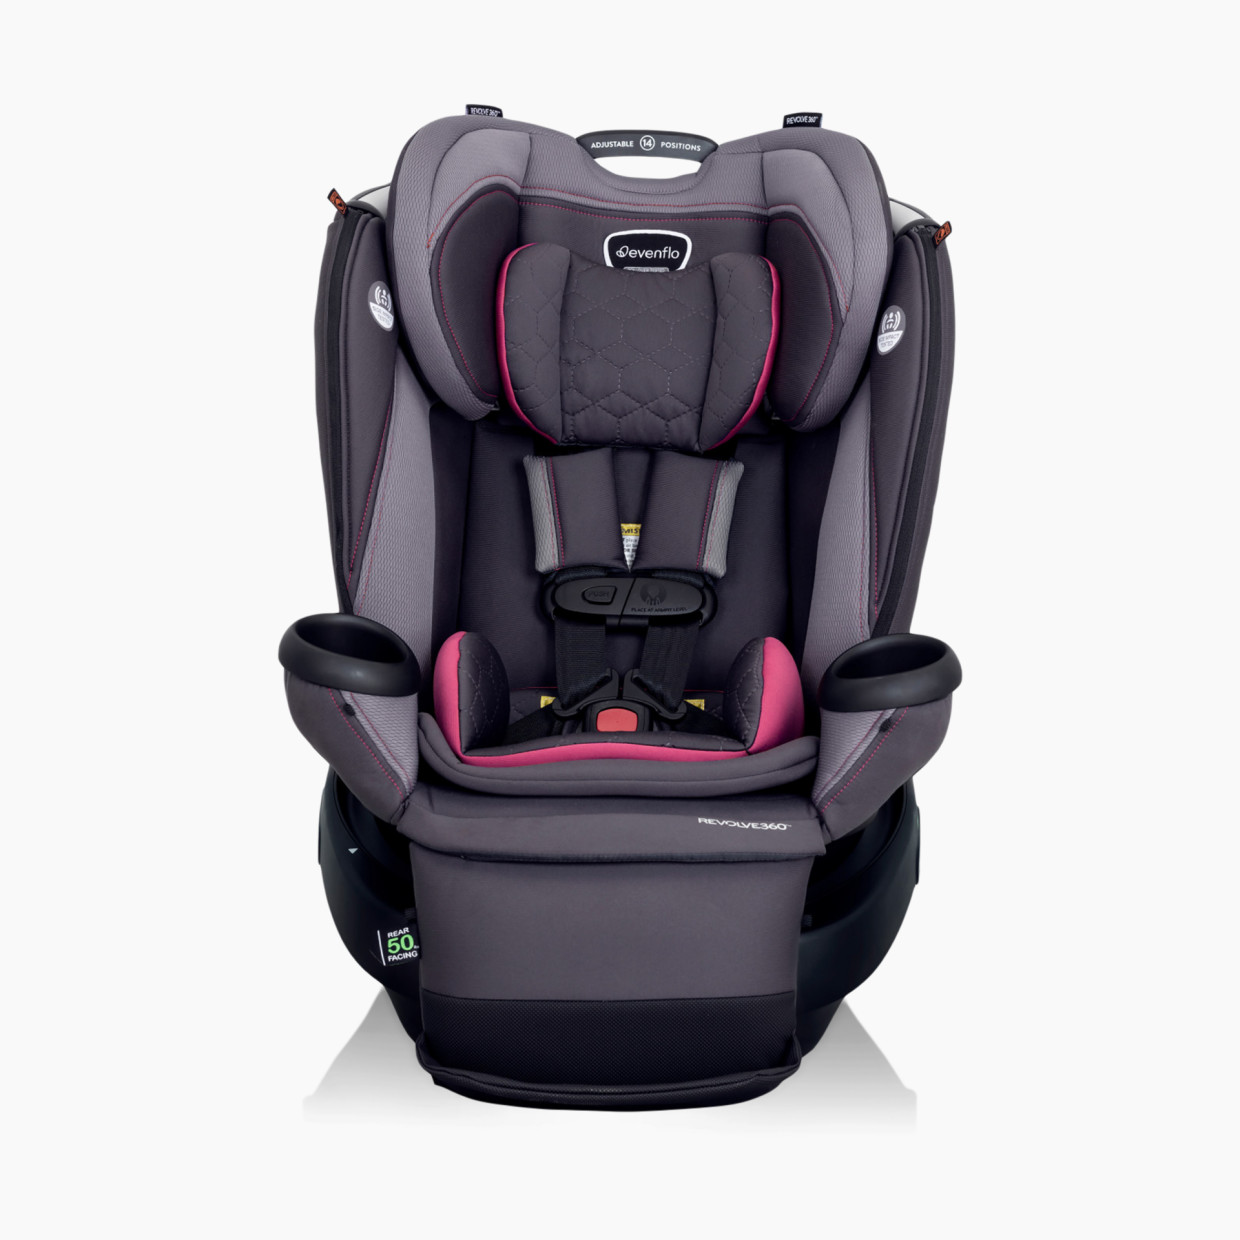 Evenflo Revolve360 Extend All-in-One Rotational Convertible Car Seat - Rowe